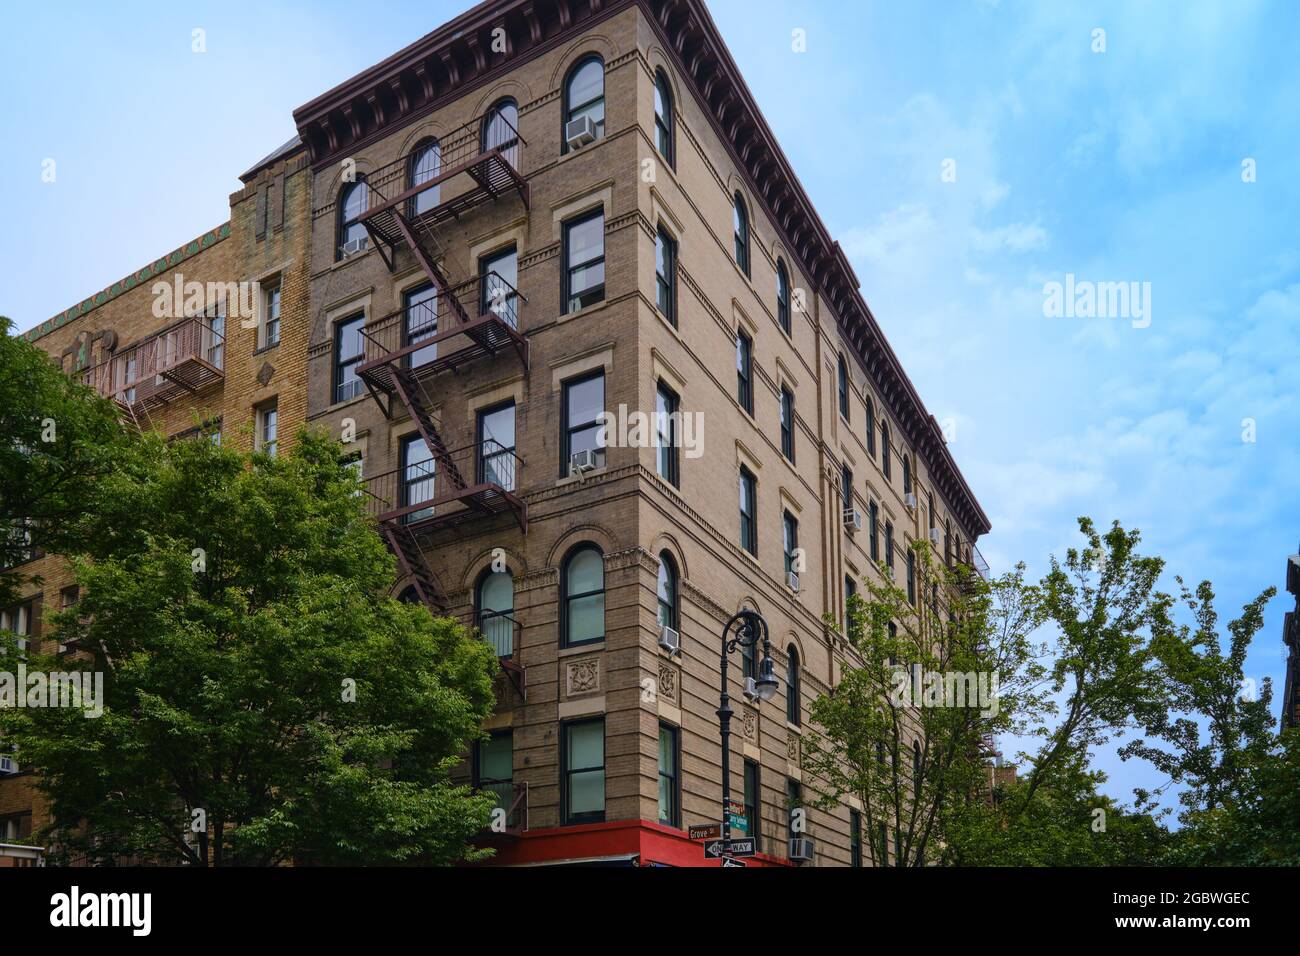 Building from Friends series in Greenwich Village, New York City Stock Photo